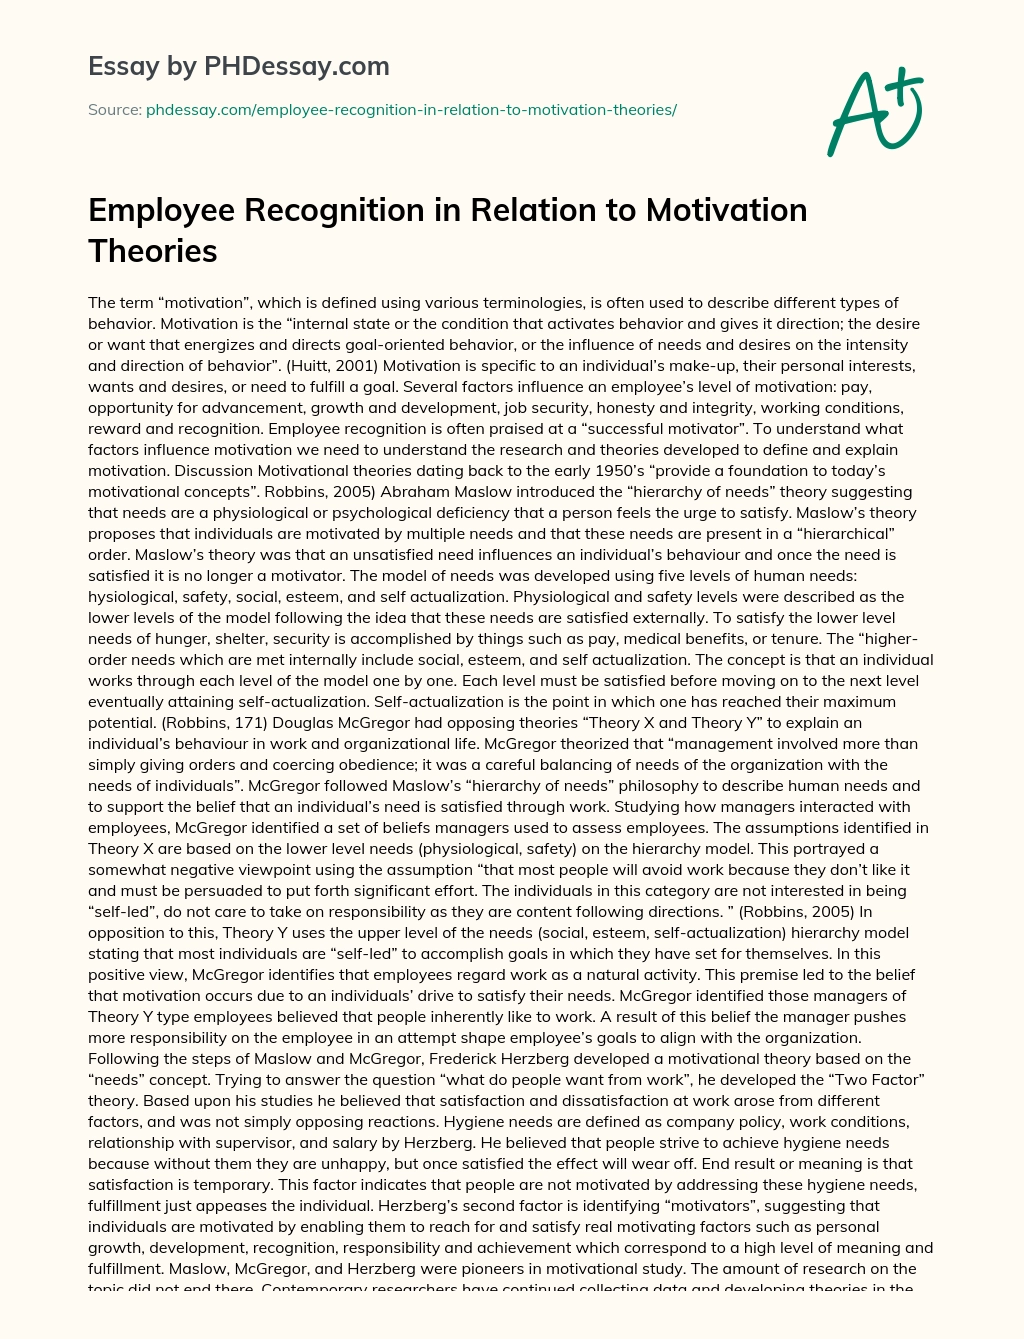 Employee Recognition in Relation to Motivation Theories essay